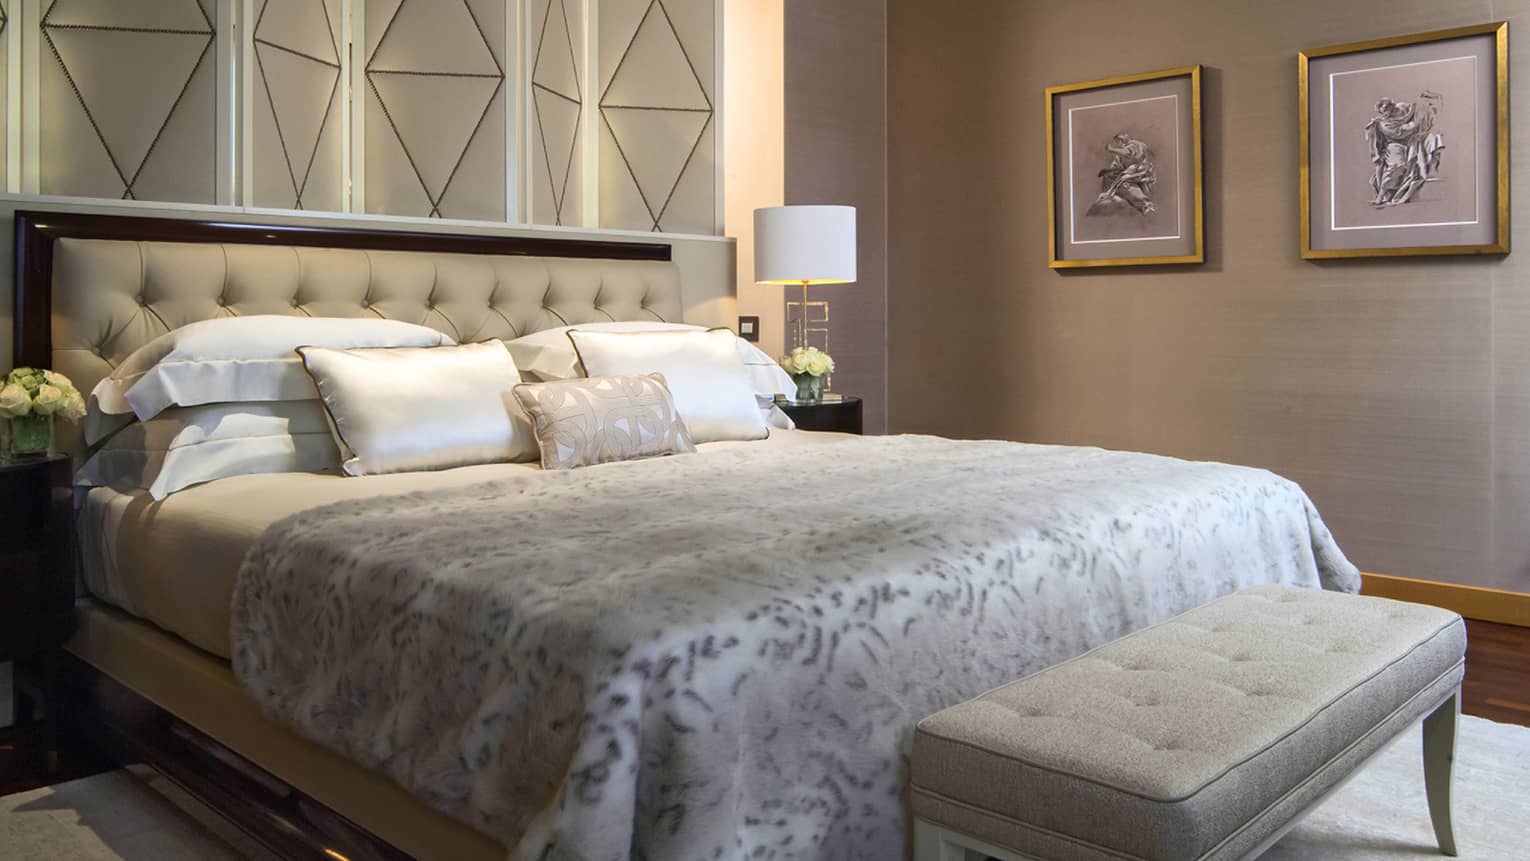 Neutrally dressed hotel bed with tufted headboard with footboard and against geometric wall